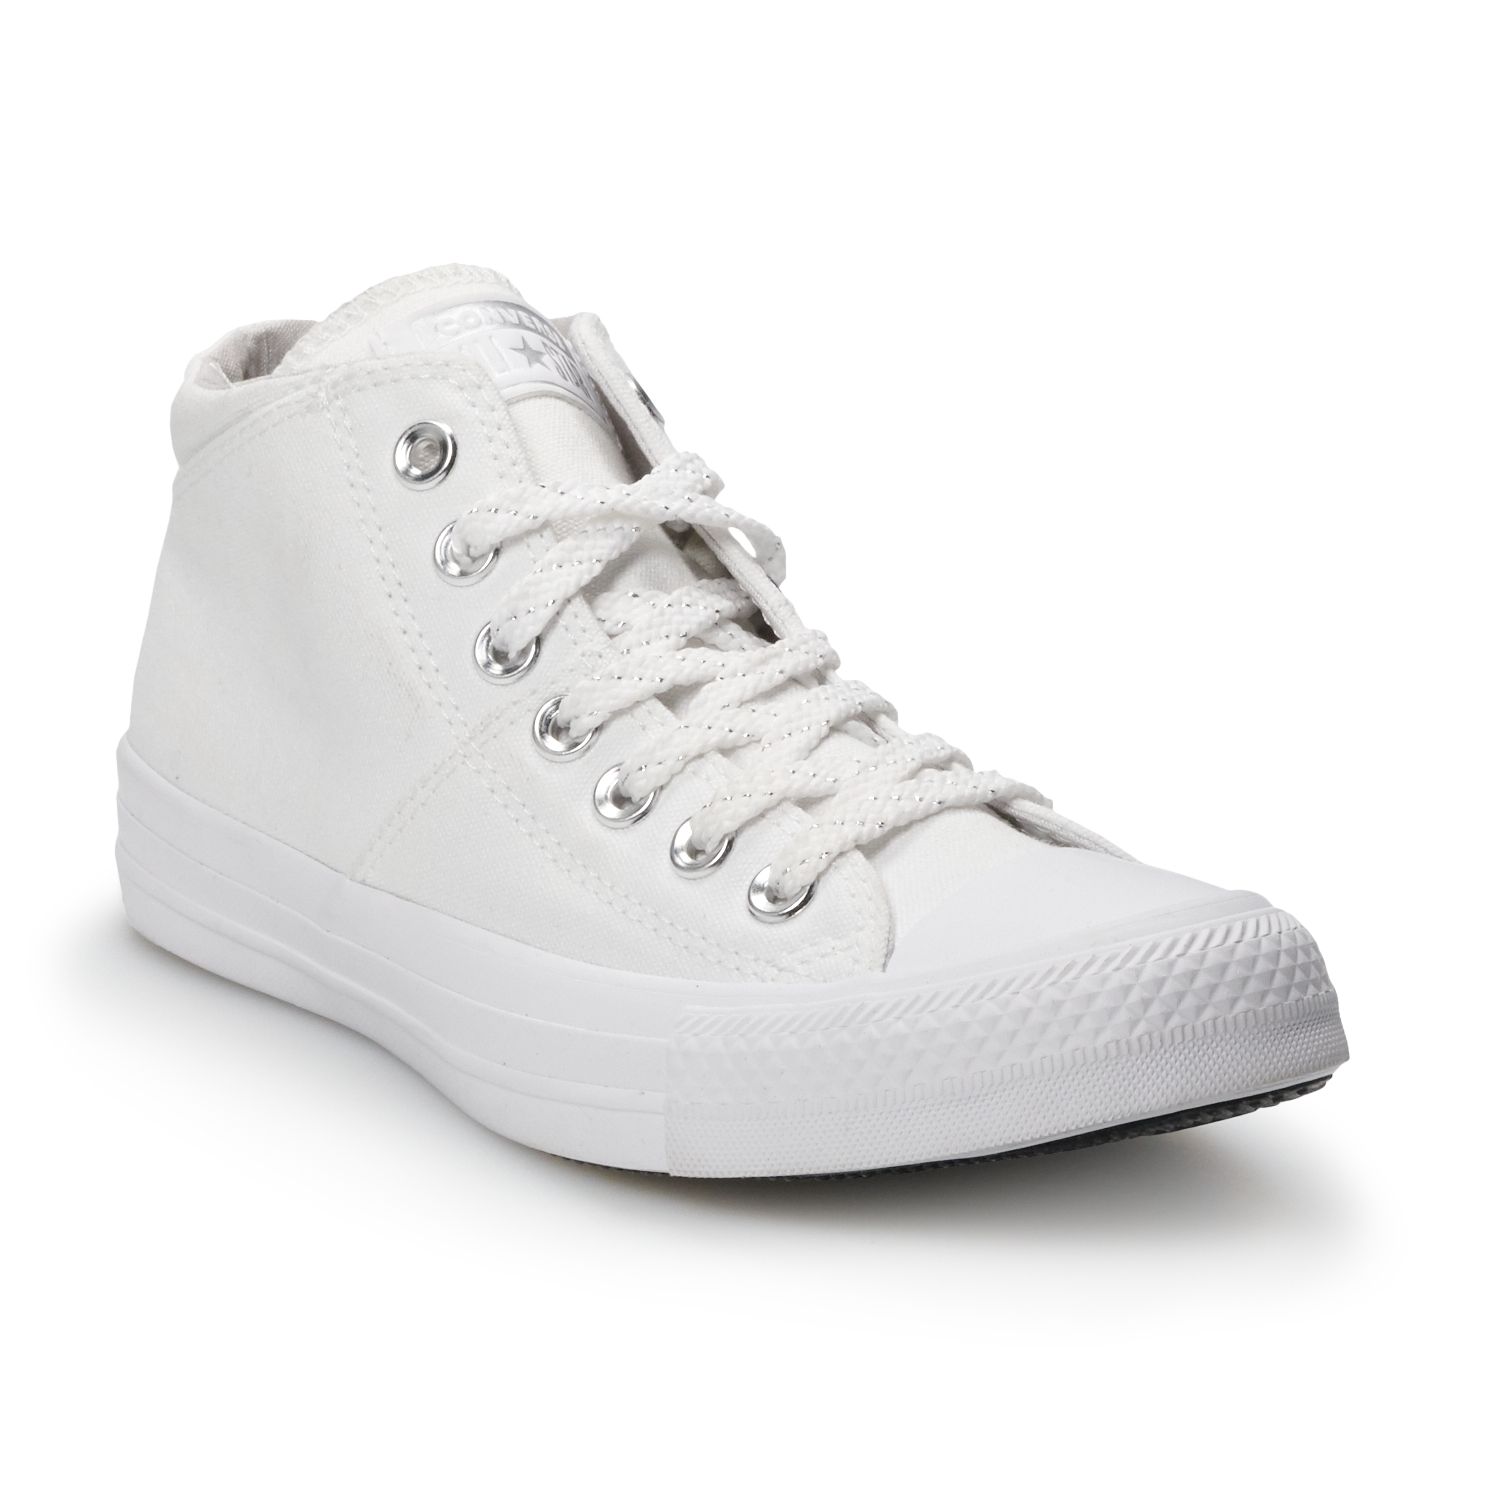 converse madison mid sneakers